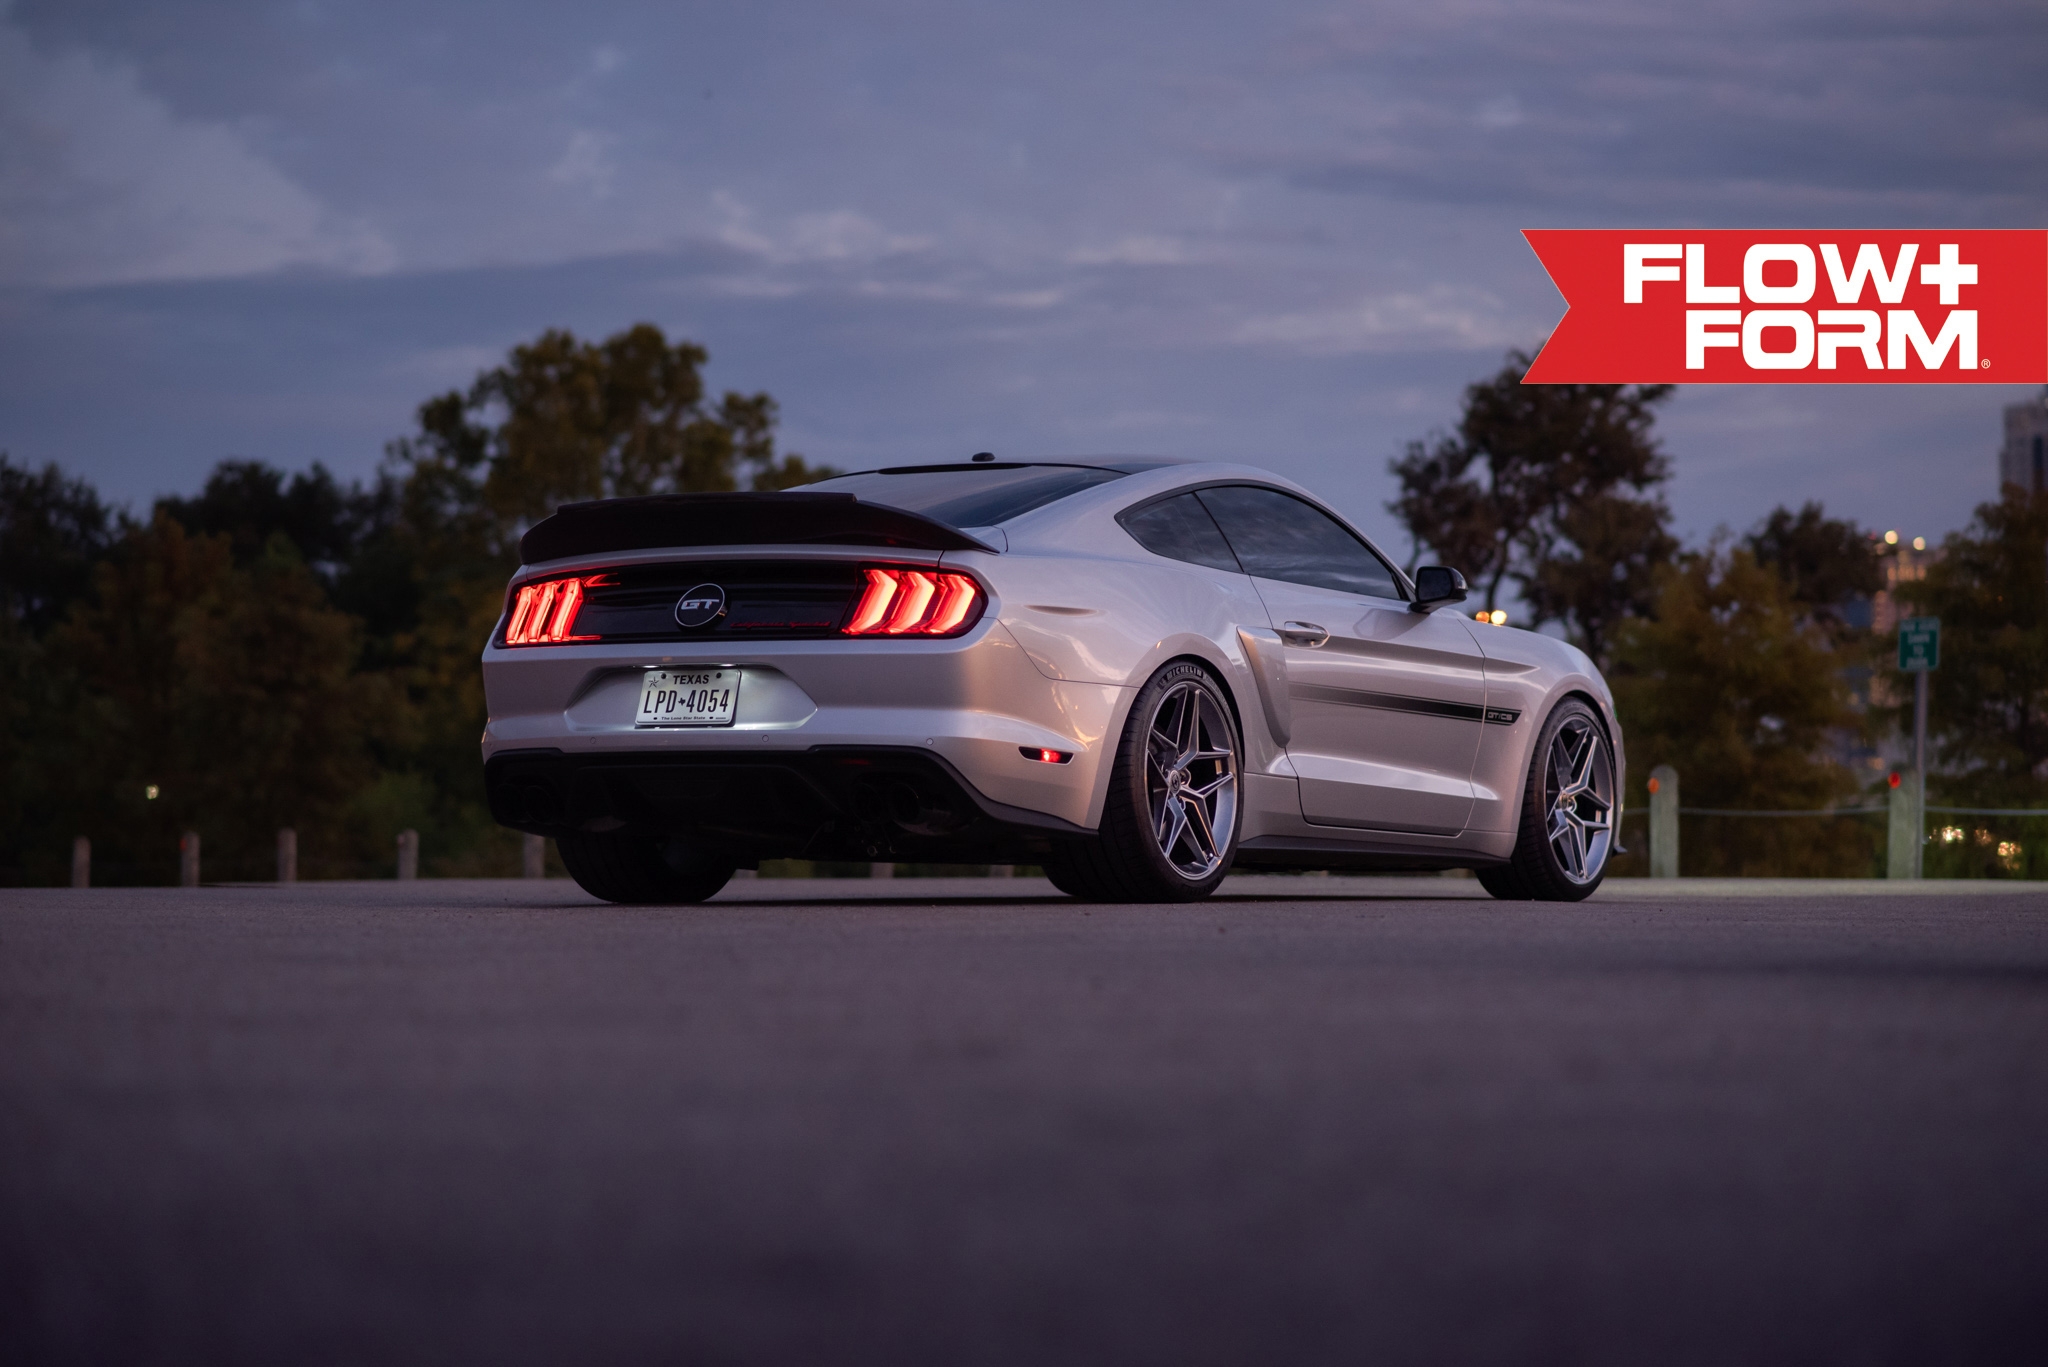 S650 Mustang Authorized HRE Wheels Dealer: Flow Form and Forged Series Wheels For Mustang S650 6